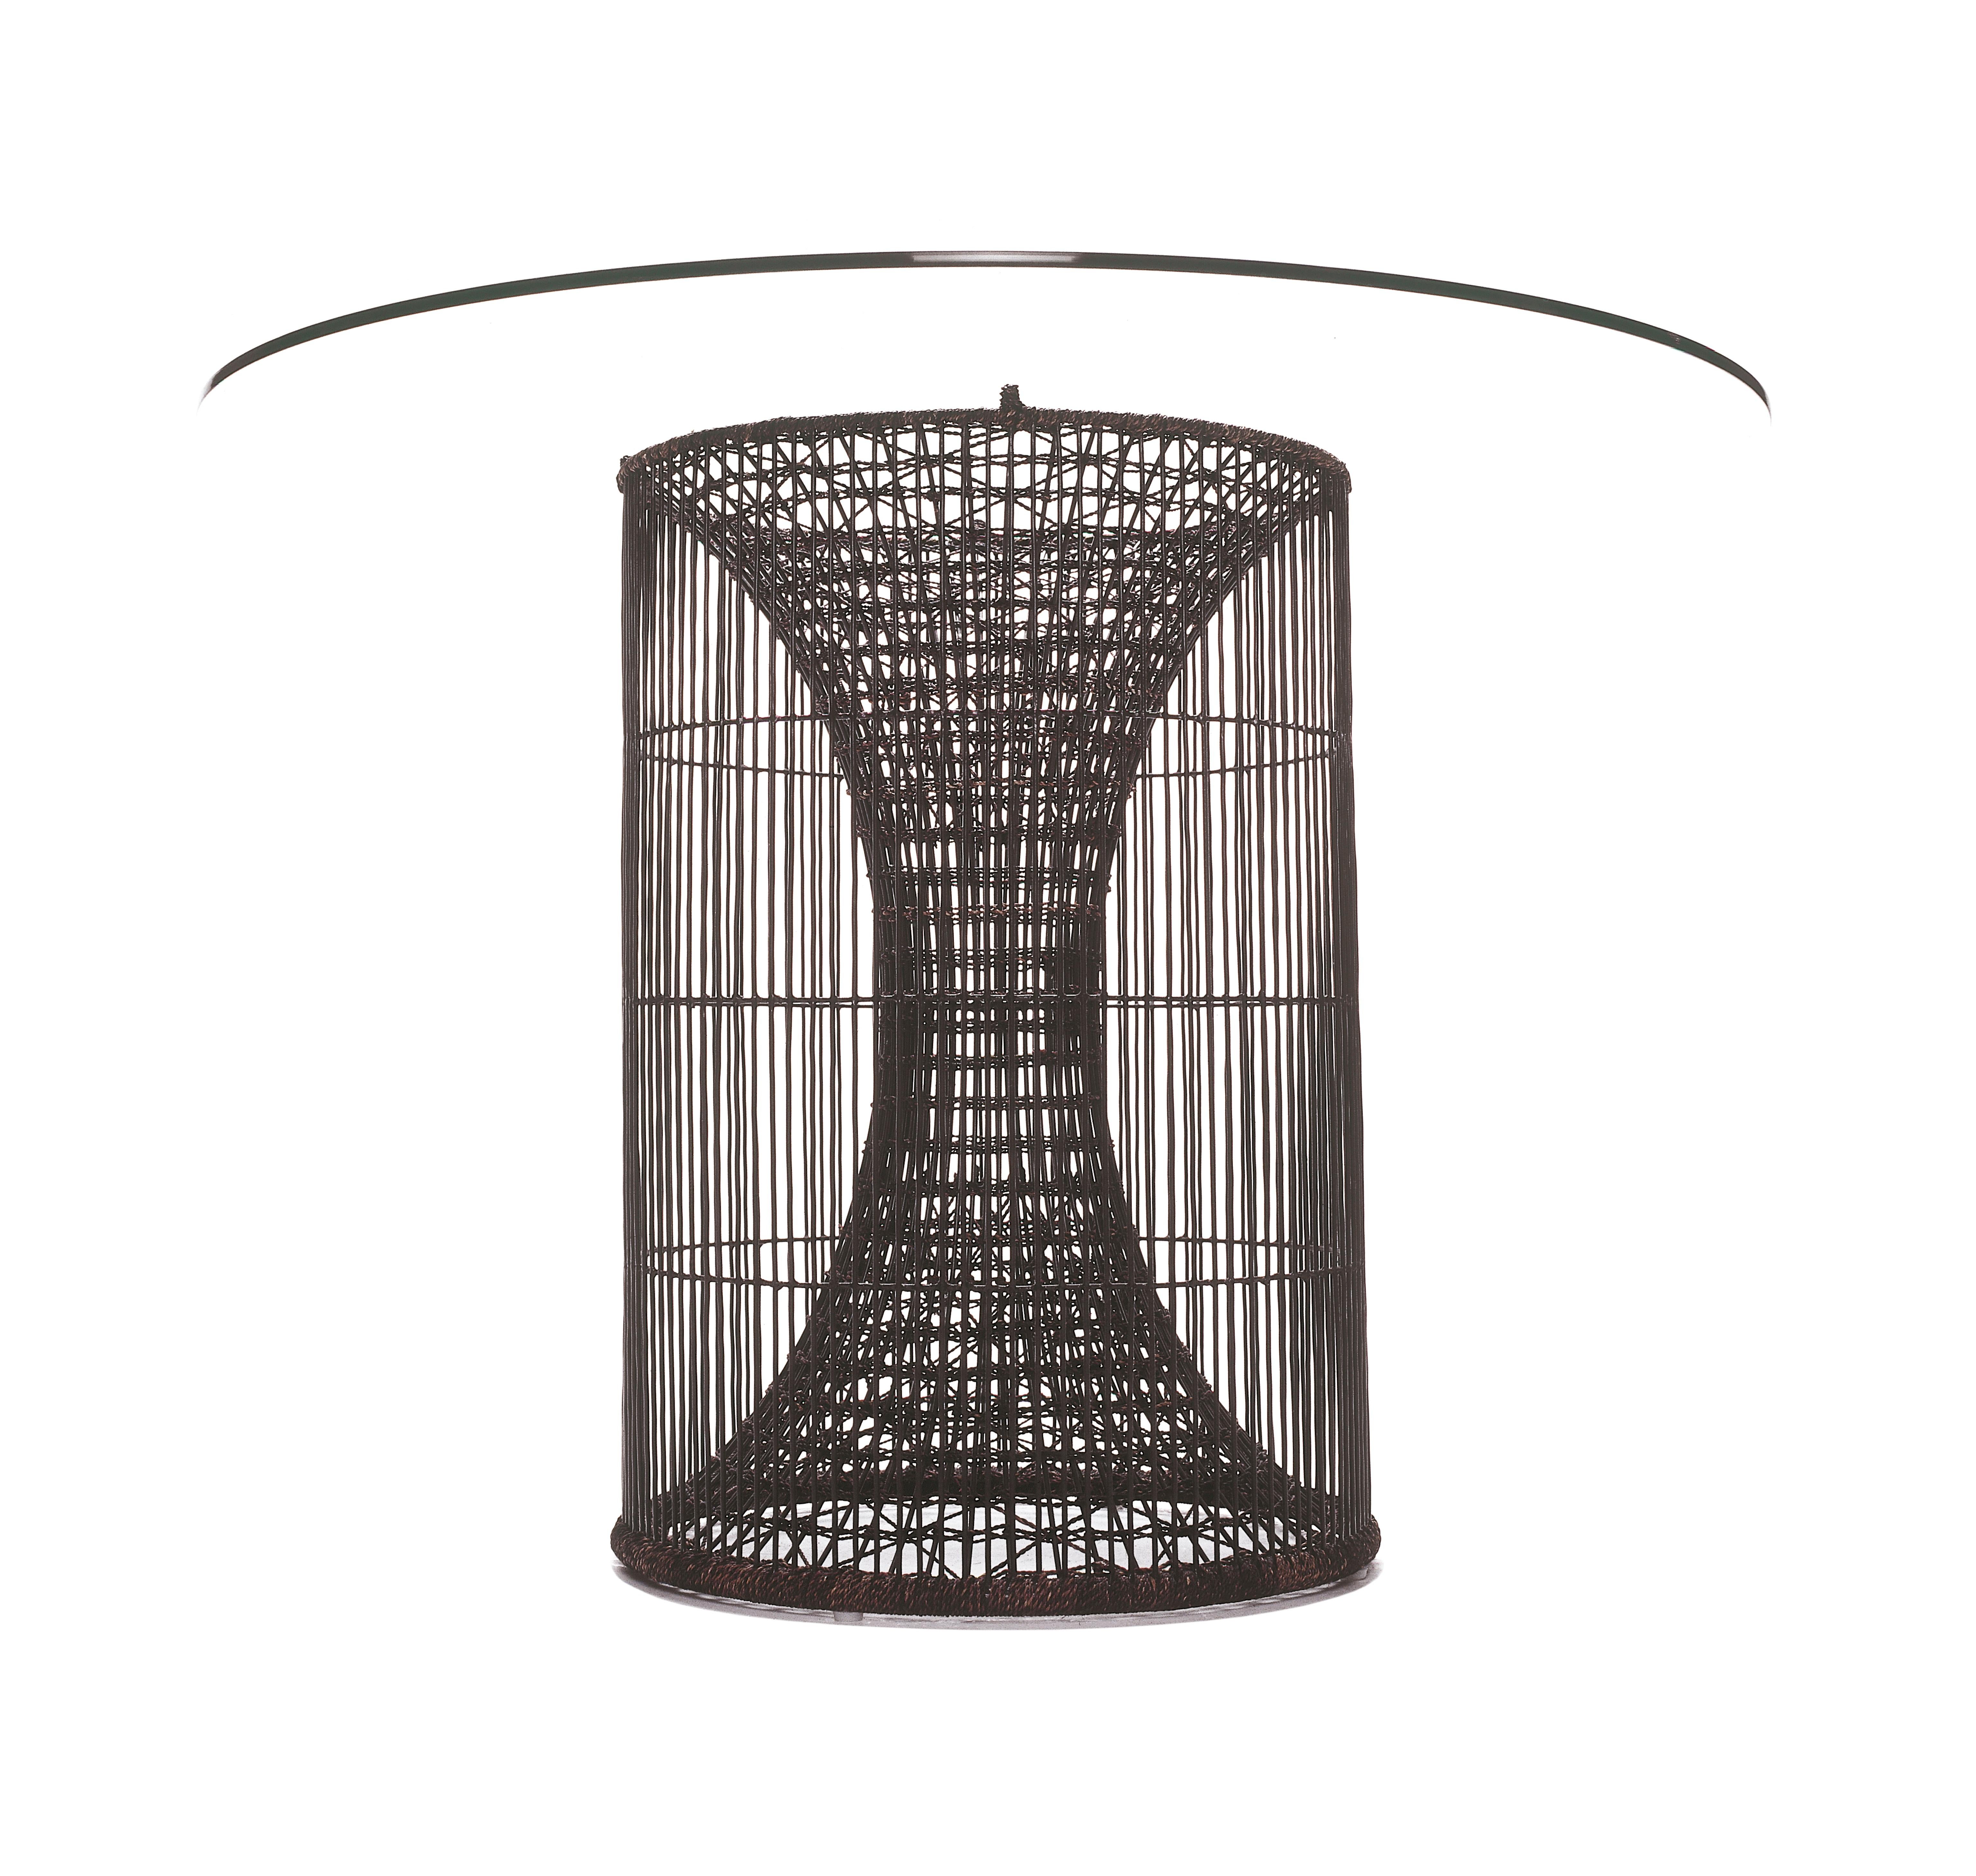 Amaya Regular dining table by Kenneth Cobonpue
Materials: Abacca. Steel. Glass.
Dimensions: 
Table diameter 51 cm x height 74 cm
Glass diameter 122cm x height 1cm

Inspired by fish traps, the Amaya tables resemble a vortex enclosed within a